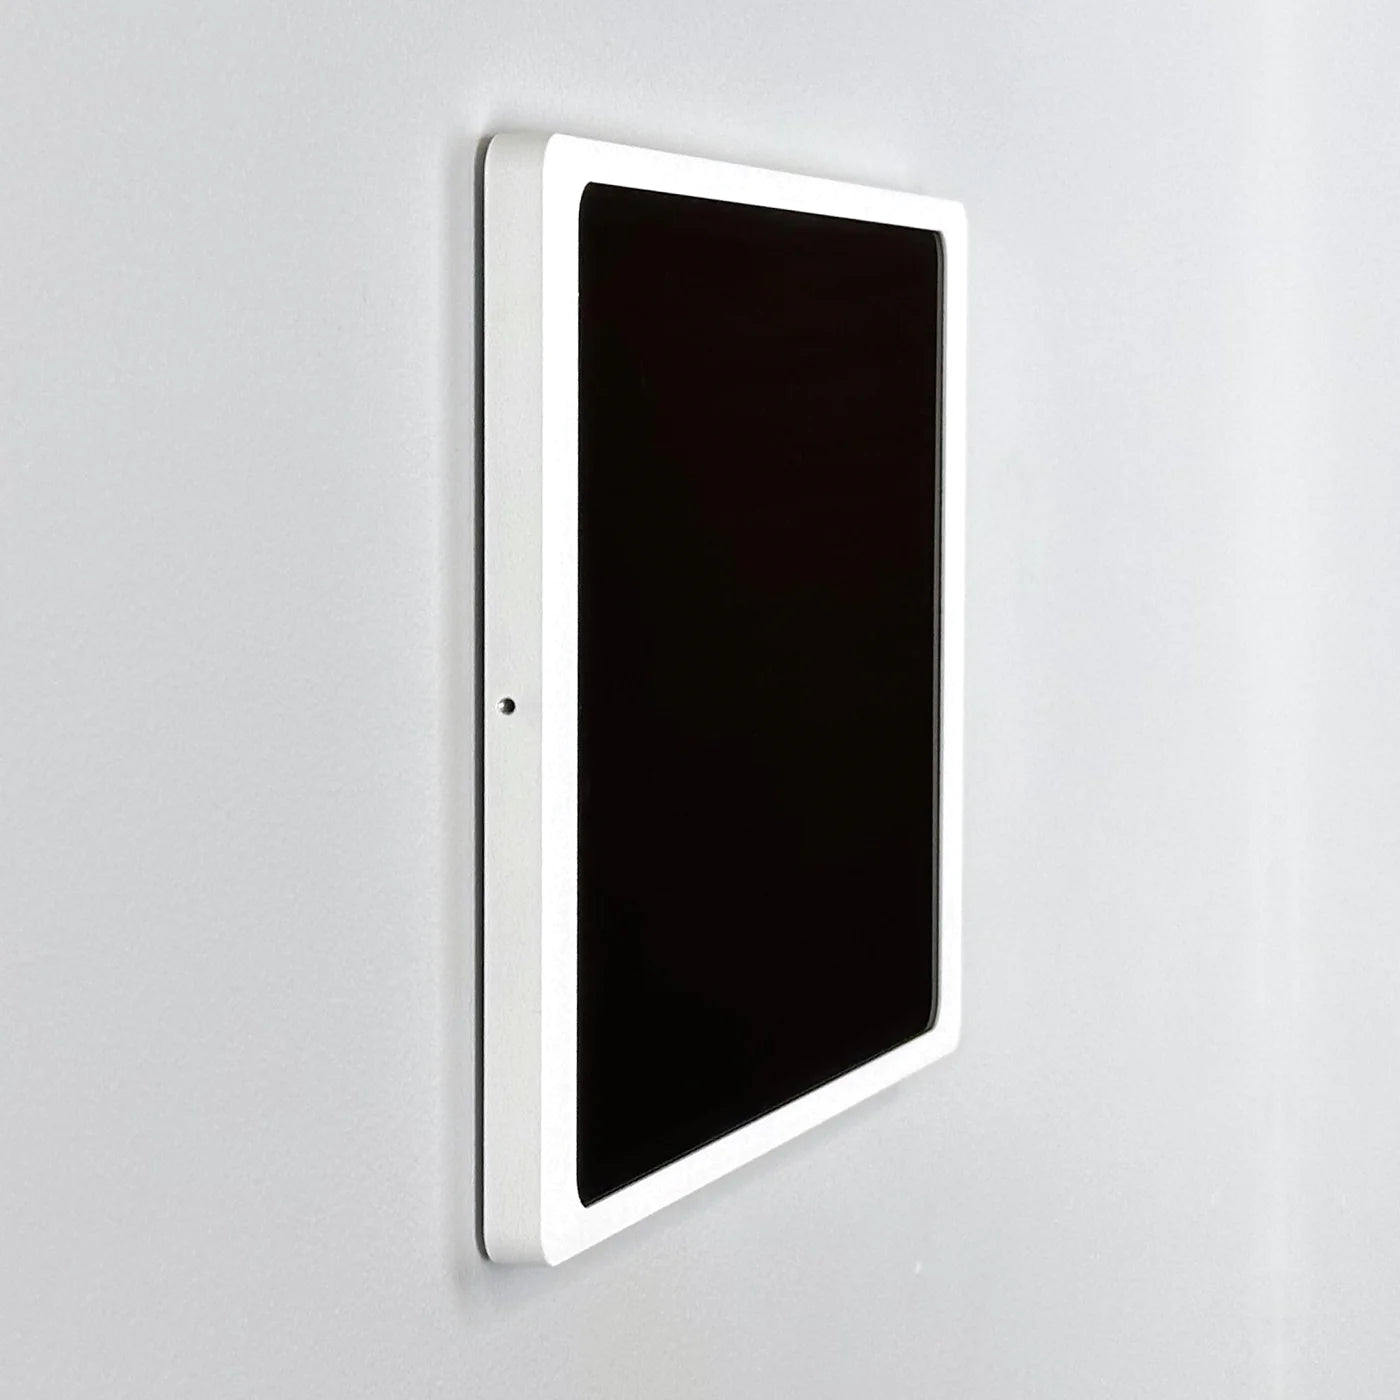 Companion Wall Home for iPad 10.9" 10th Gen. USB-C White Powder Coated